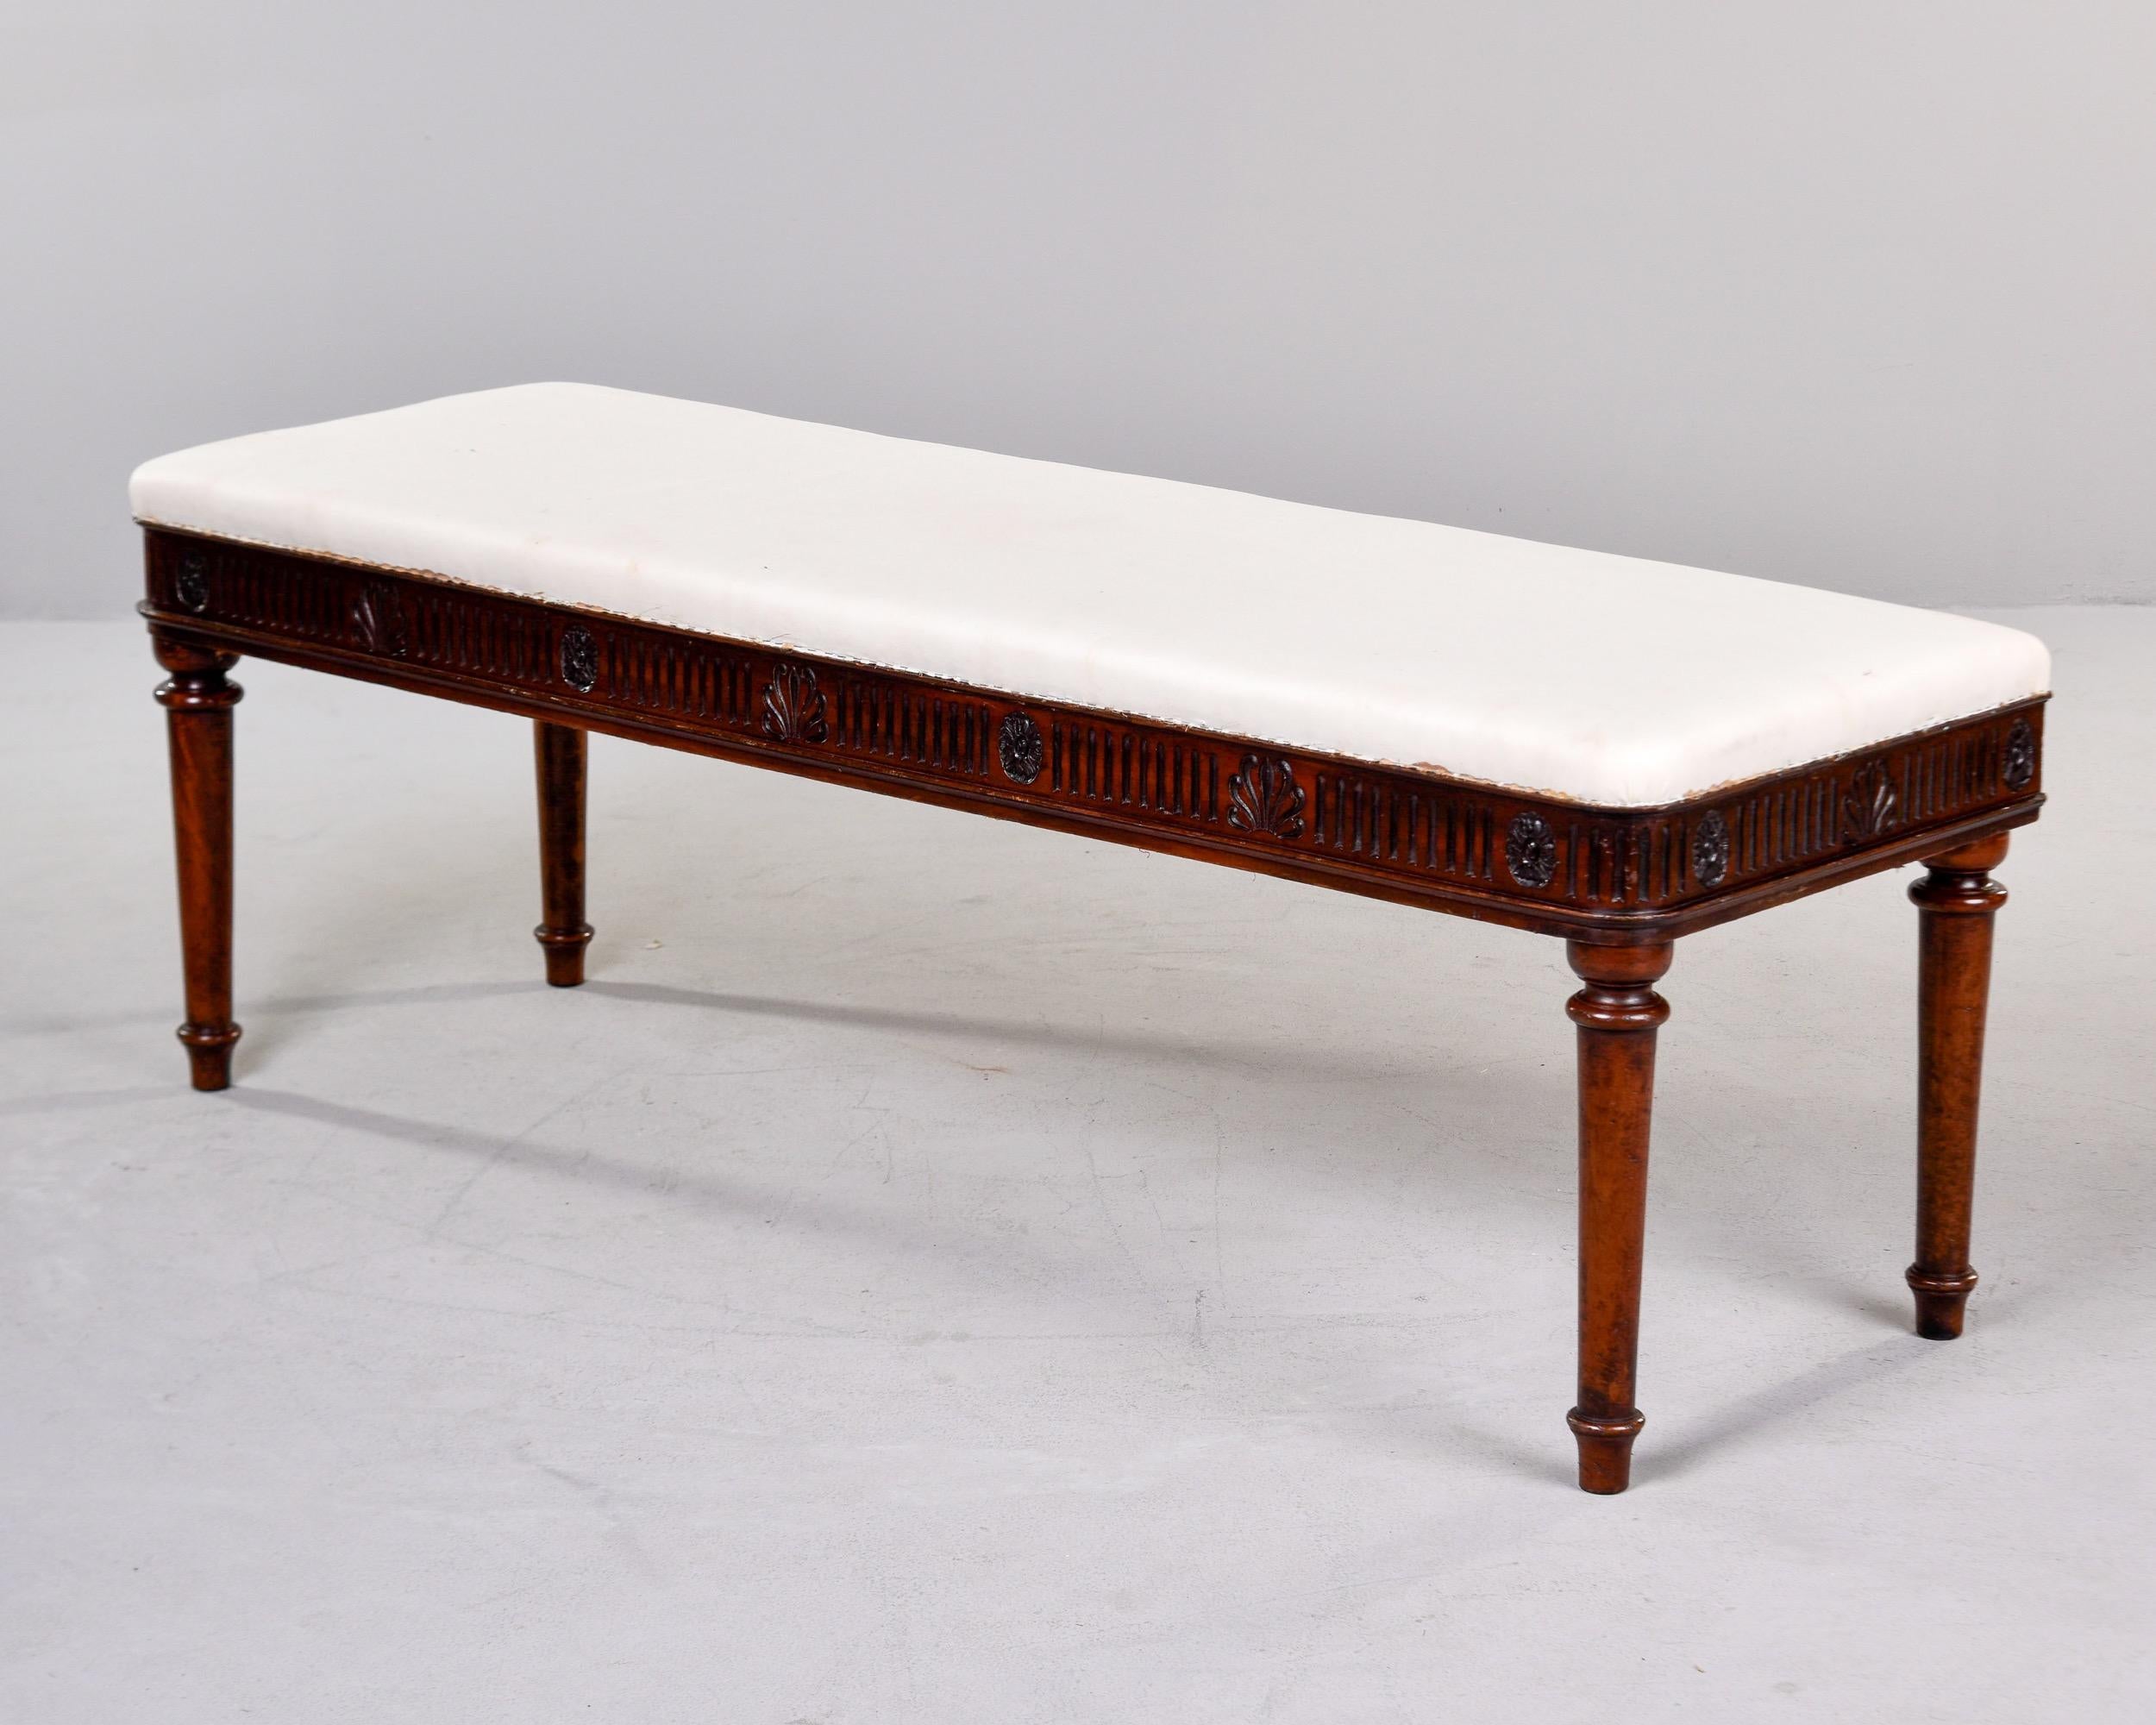 Regency Mid 19th C English Upholstered Mahogany Window Seat with Reeded Detail   For Sale